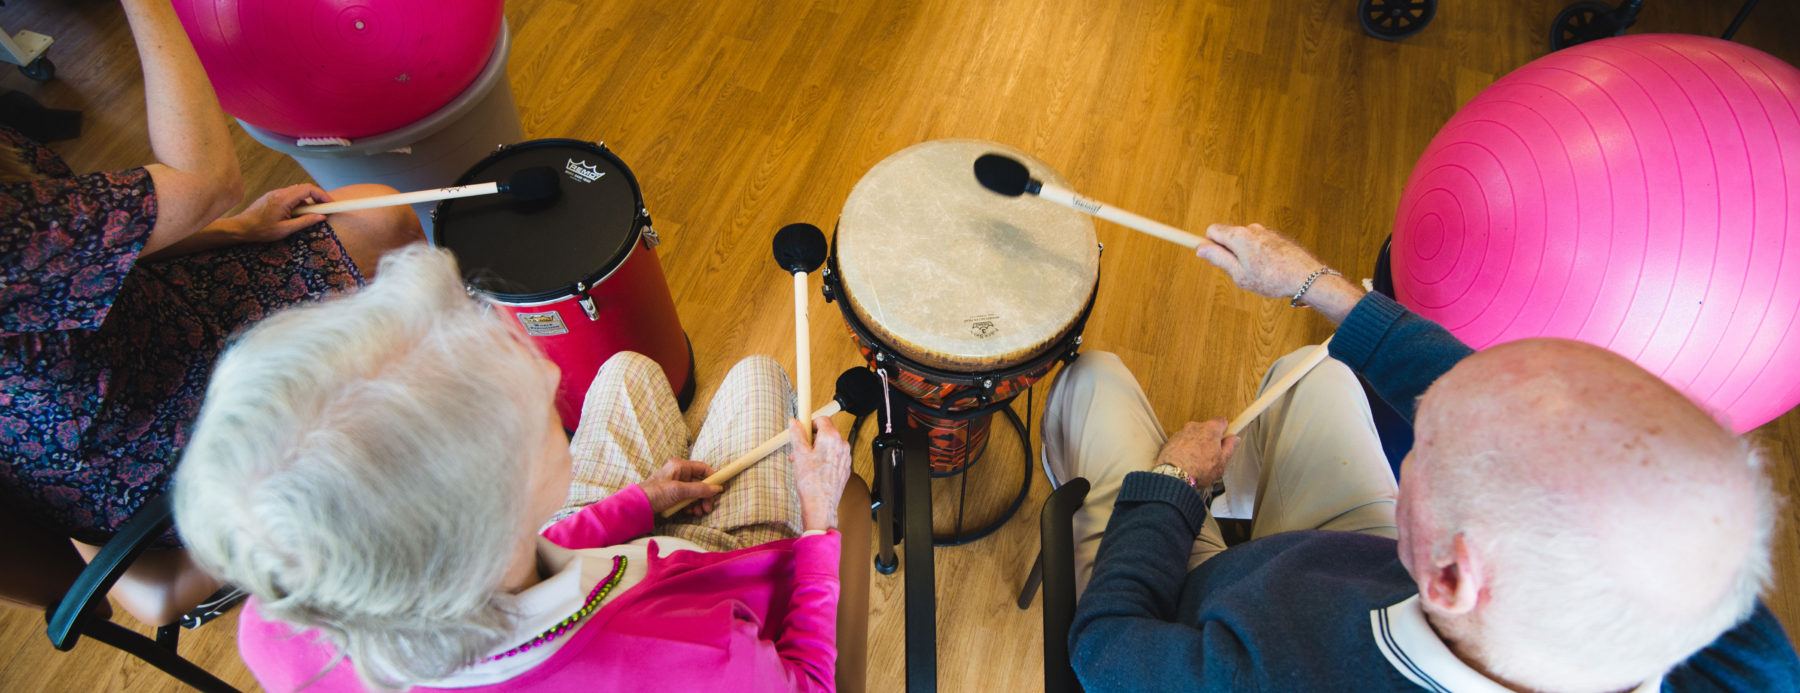 Three people playing drums